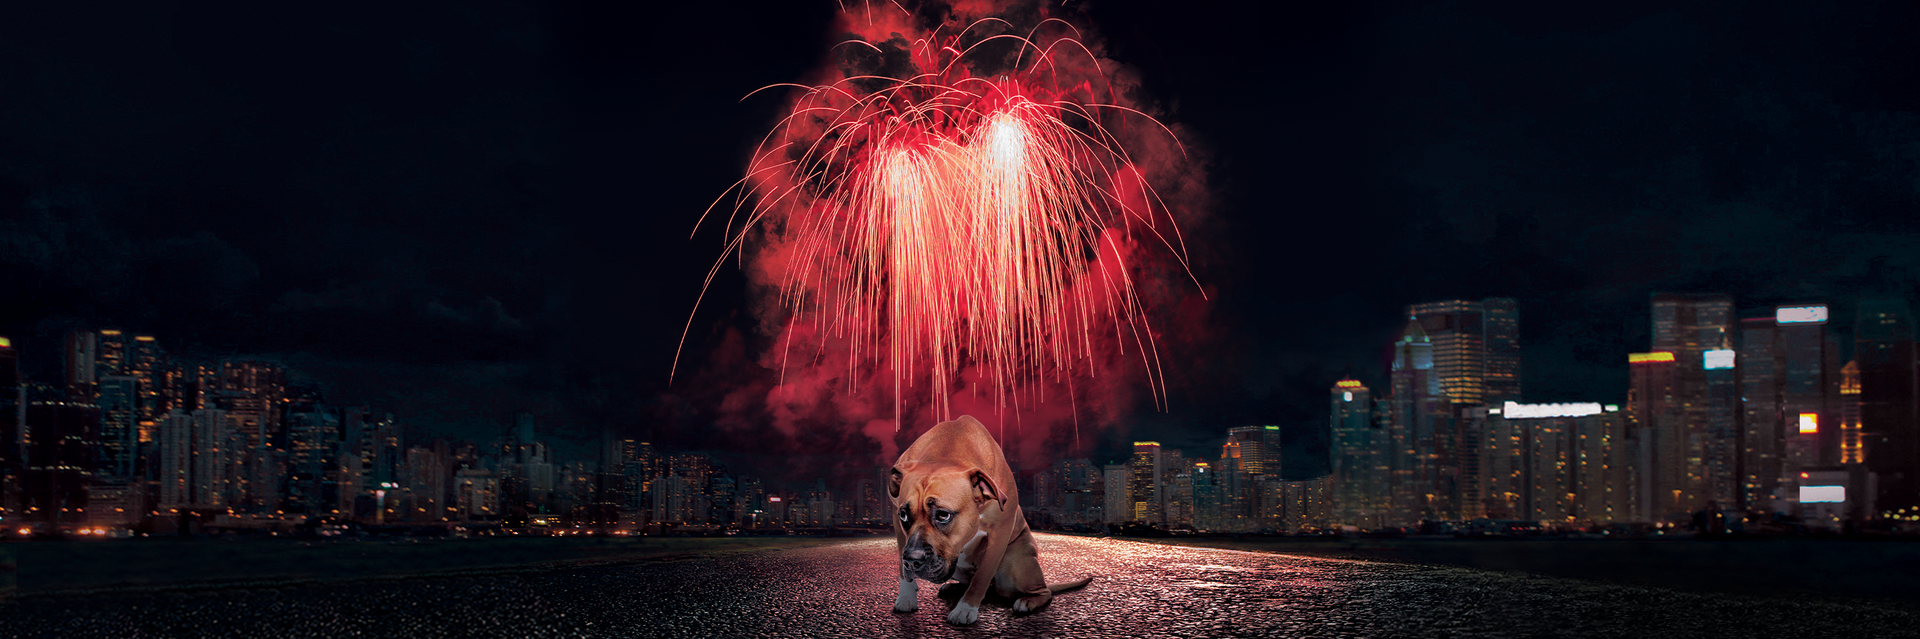 Fireworks are dangerous for pets and stray dogs